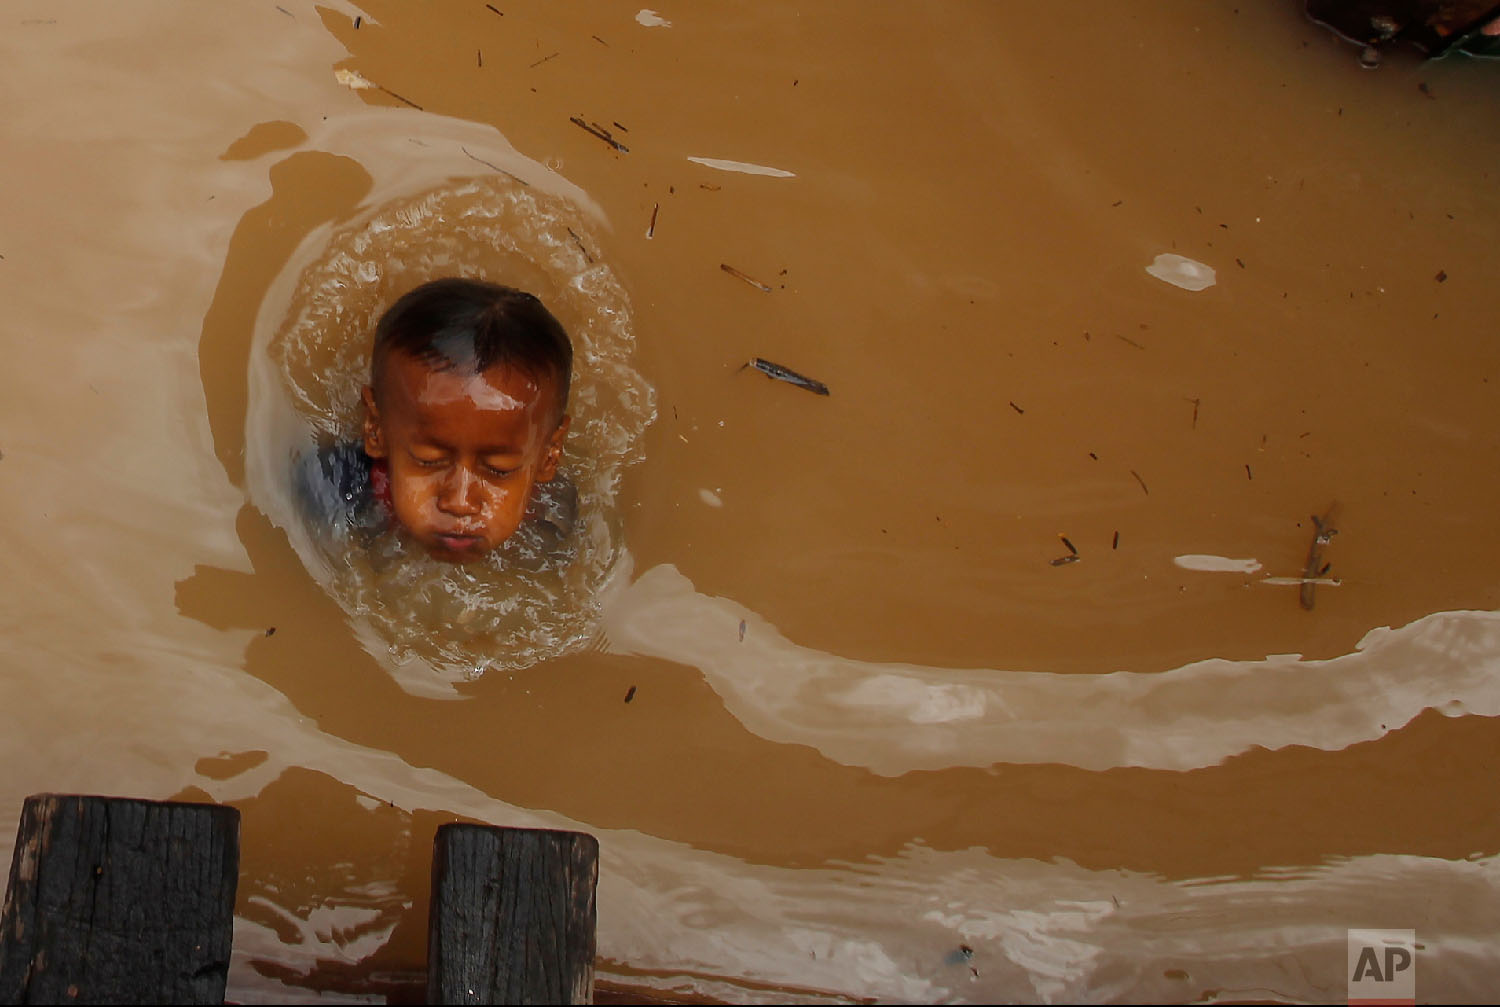  A boy swims during a flood season in the floating village on the Mekong river bank on the outskirts of Phnom Penh, Cambodia, on Aug. 11, 2018. (AP Photo/Heng Sinith) 